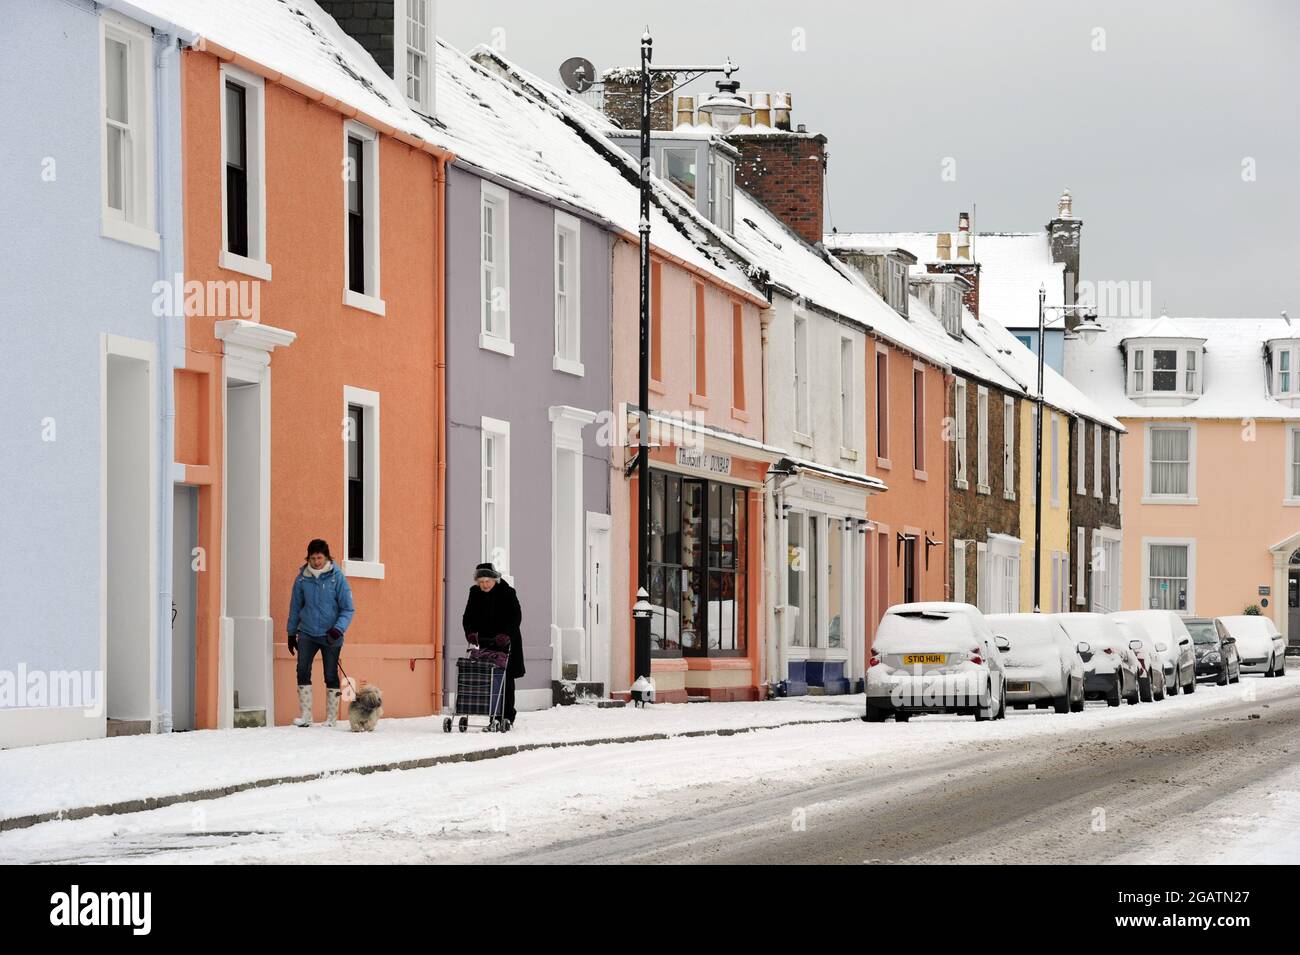 A street in Kirkcudbright, Dumfies and Galloway, Scotland. The houses are colourful and winter snow is on the road and pavement Stock Photo